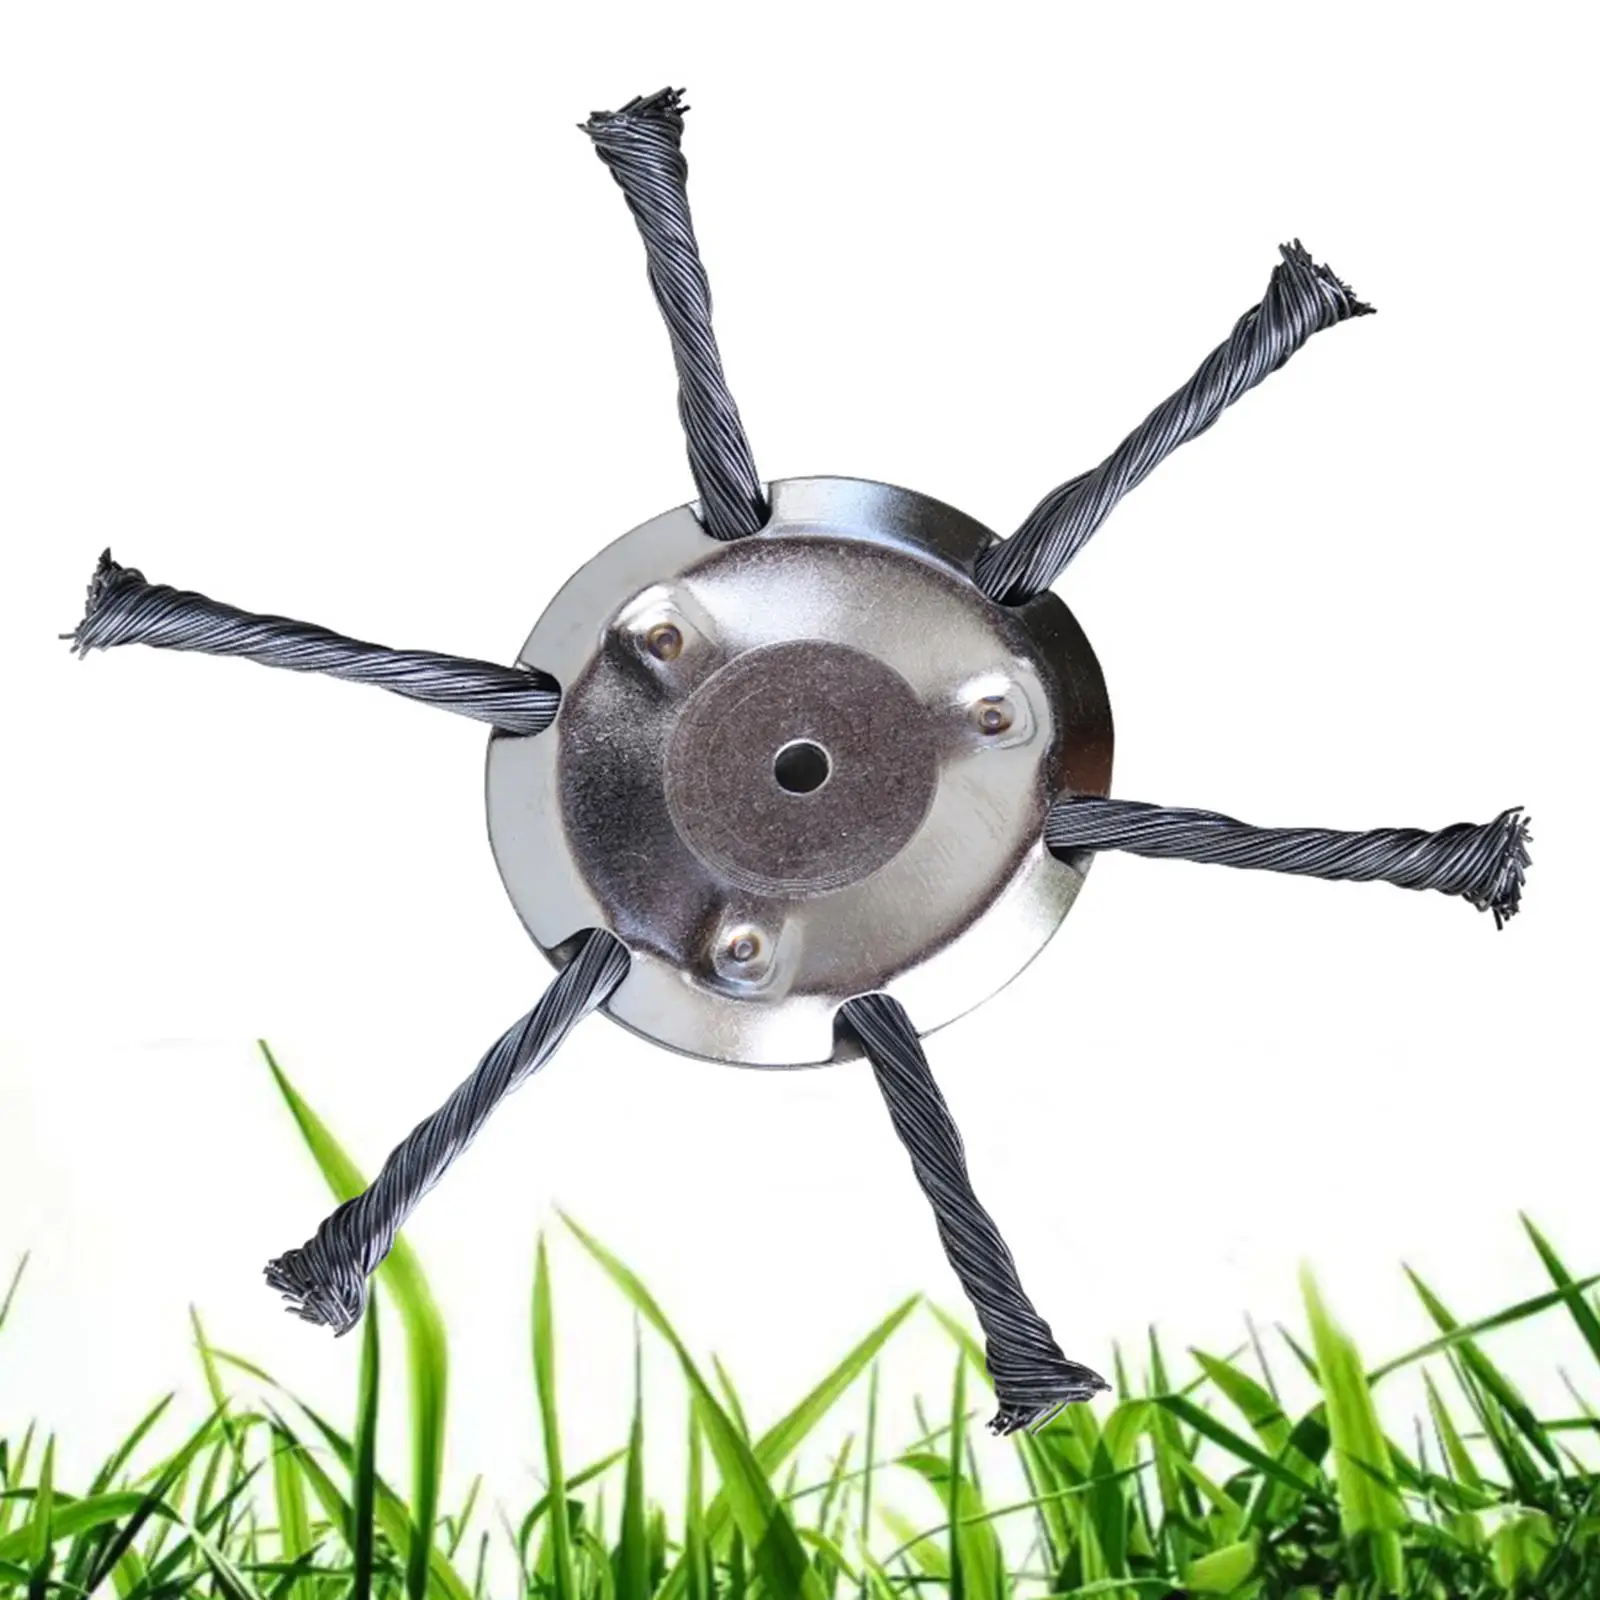 Stainless Steel Trimmer Head Replacement Weed Eater Head for Outside Garden Lawn Grass